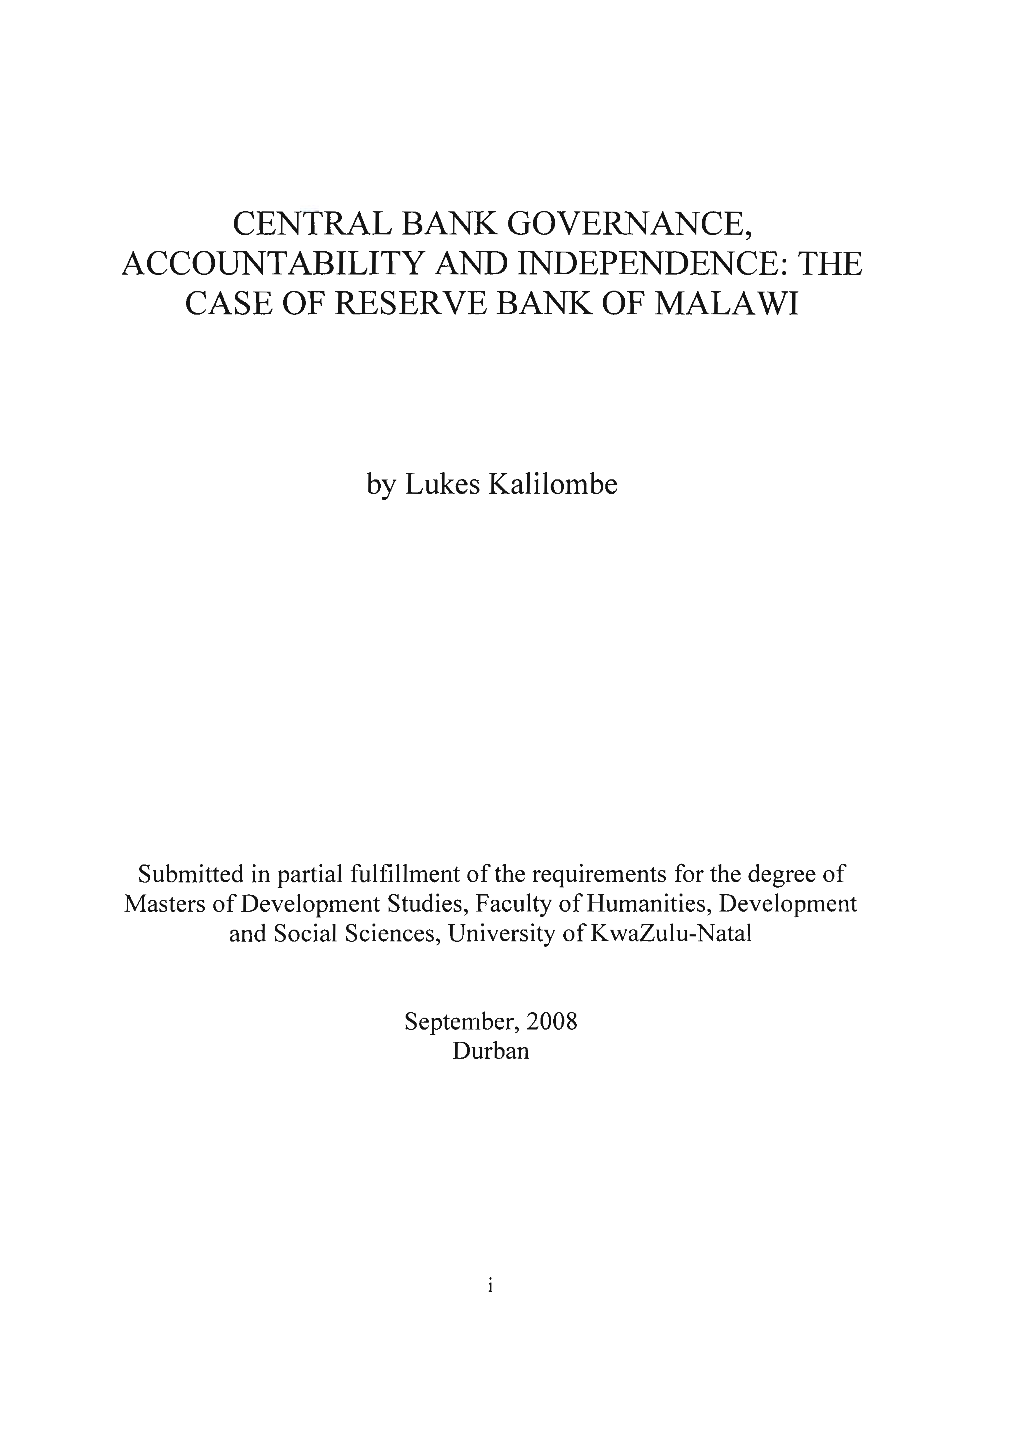 Central Bank Governance, Accountability and Independence: the Case of Reserve Bank of Malawi